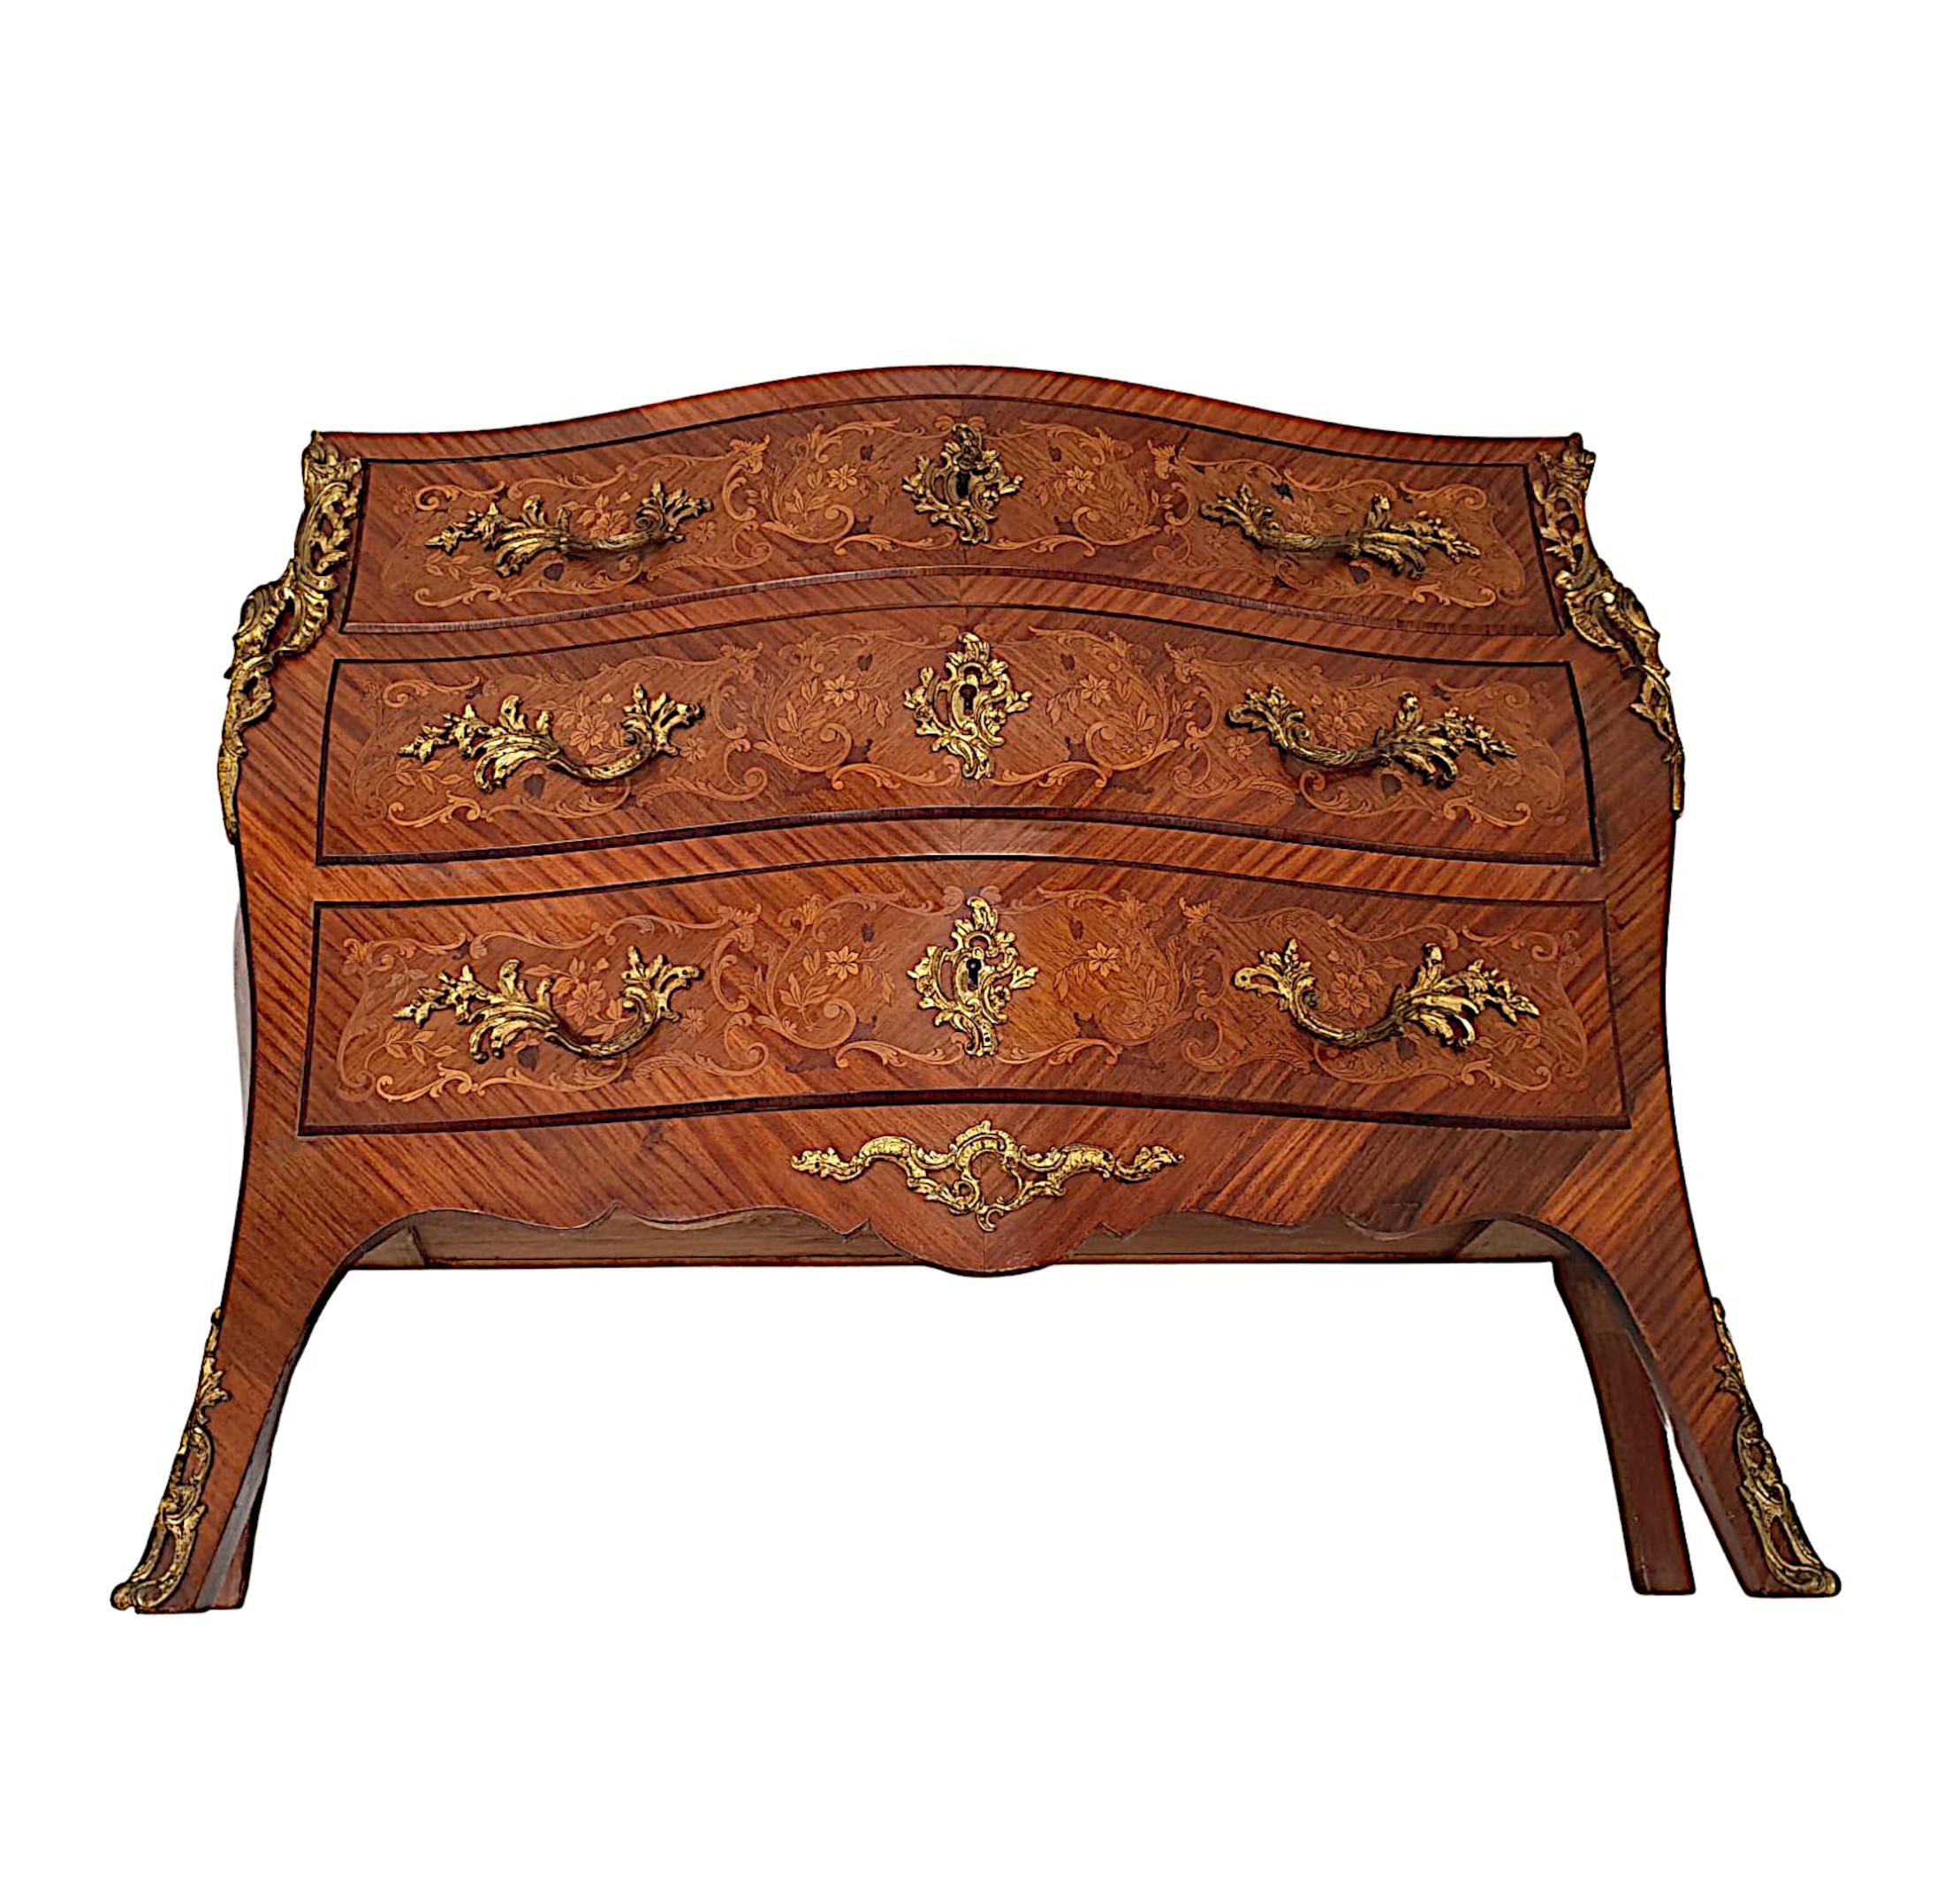 Very Fine 19th Century Marquetry Inlaid Marble Top Chest of Drawers For Sale 1